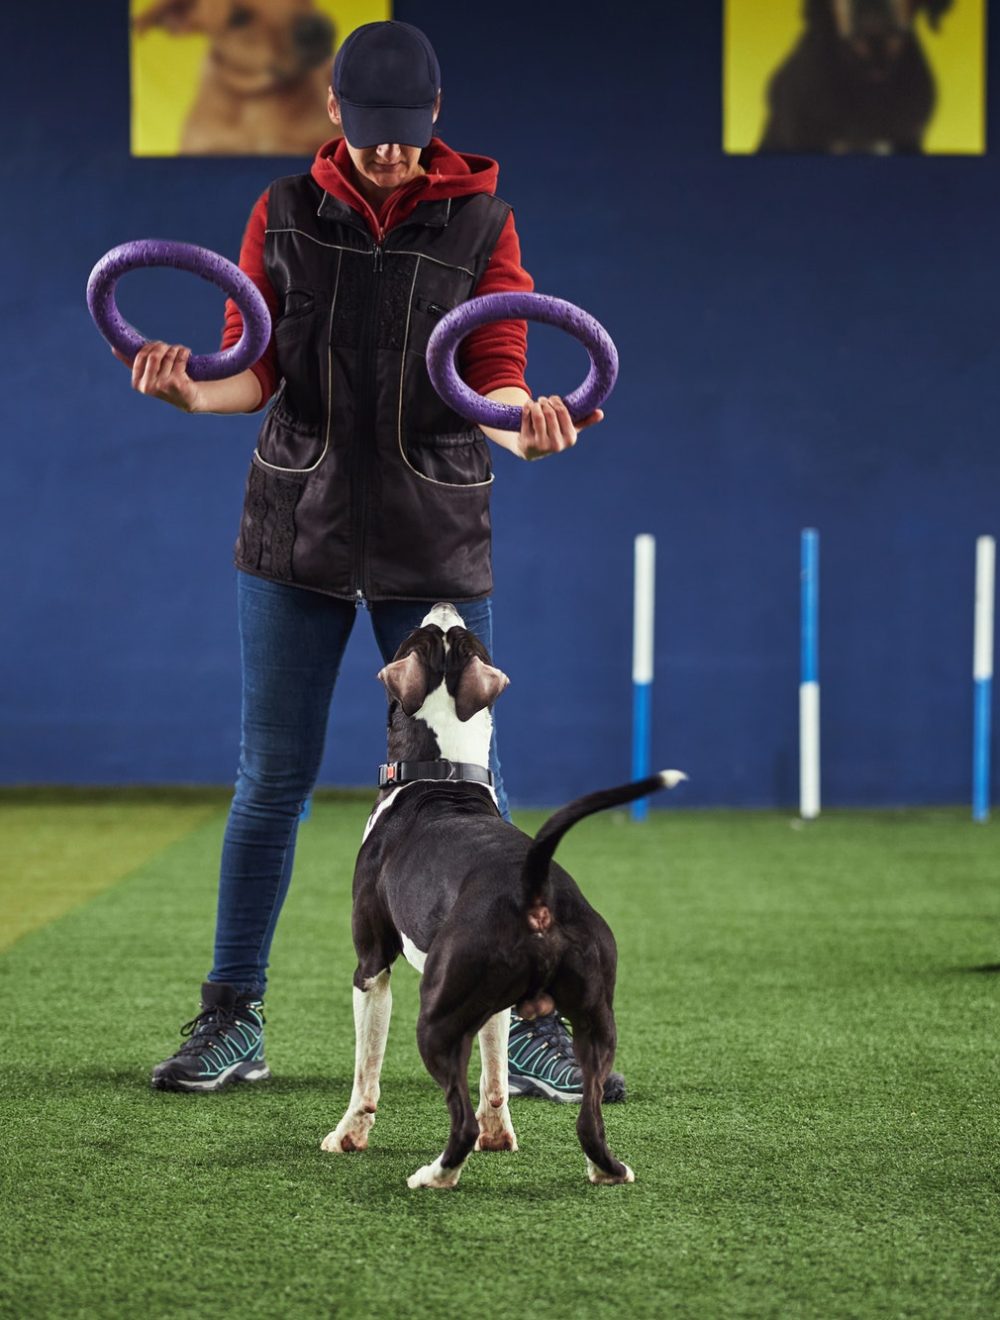 Handler using fitness tools during the dog training session